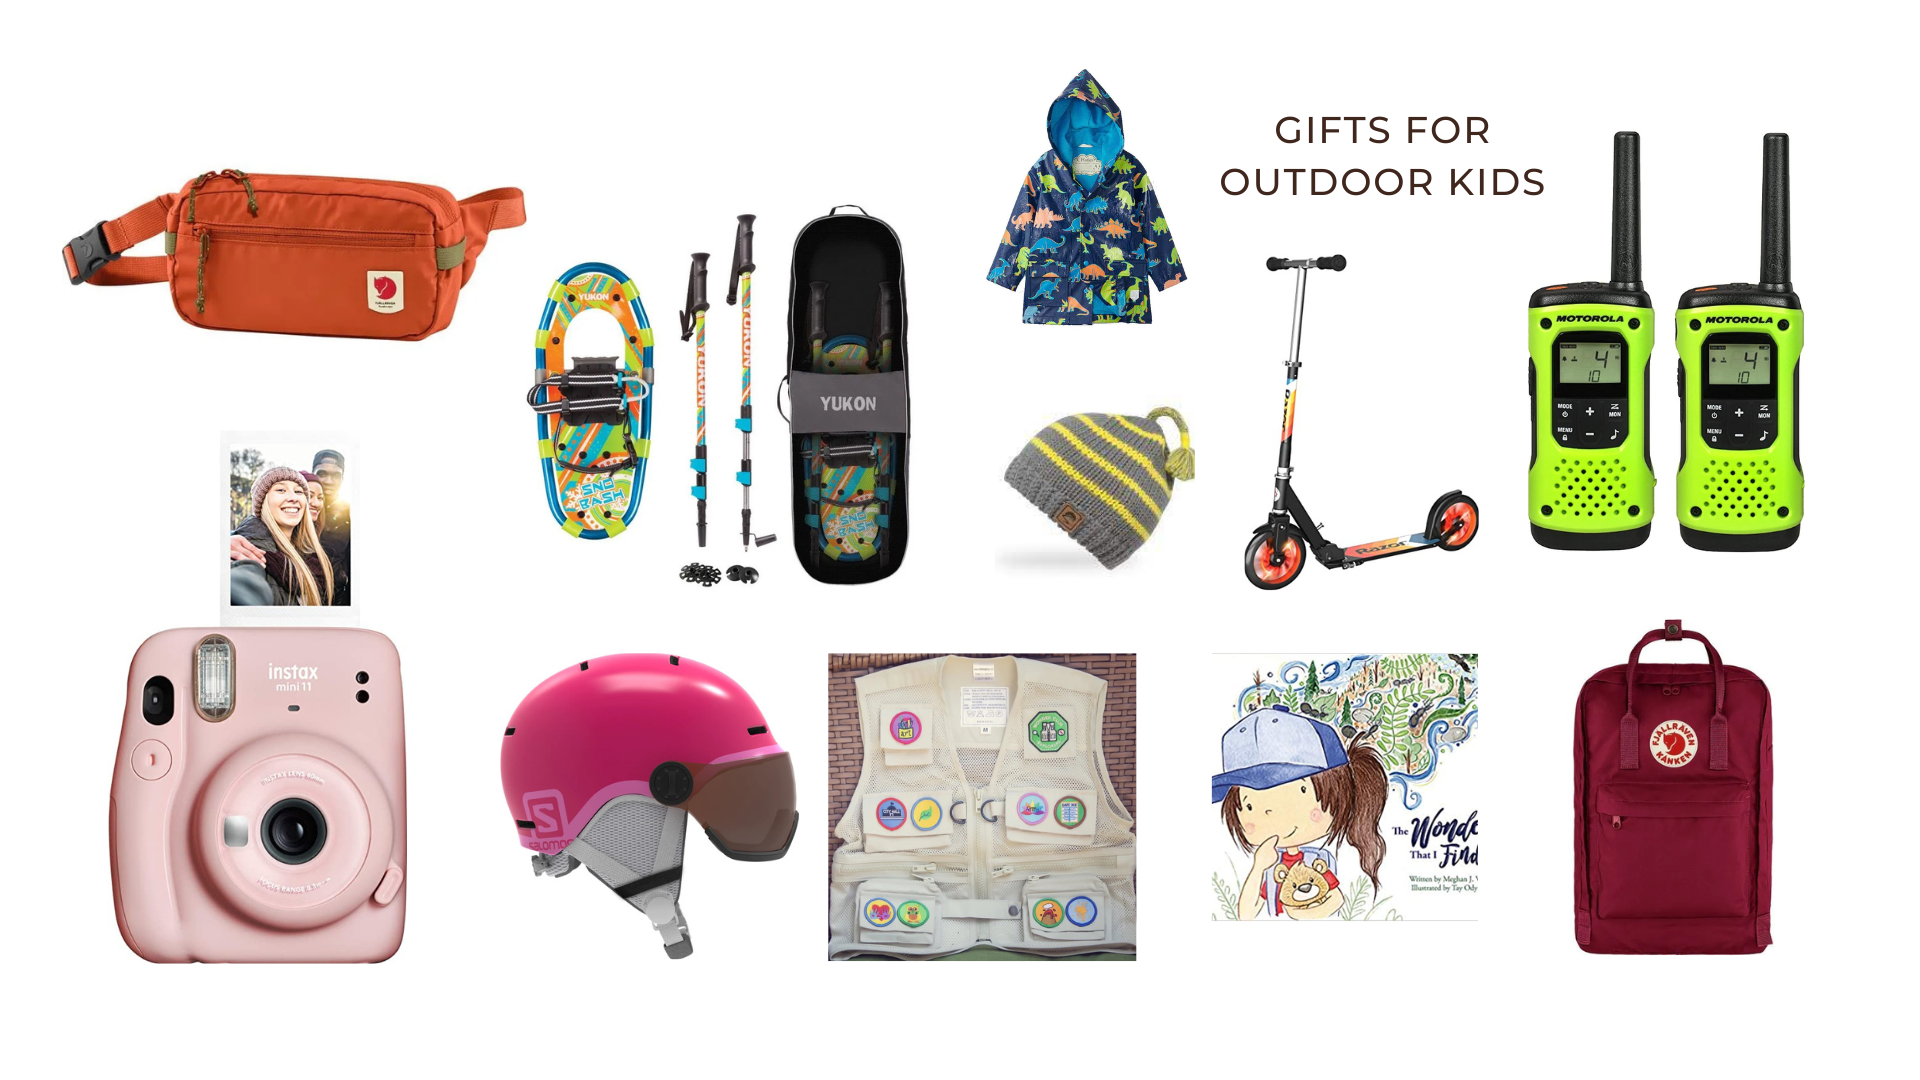 https://playoutsideguide.com/wp-content/uploads/2022/11/2022-holiday-gift-guide-for-outdoor-kids.png